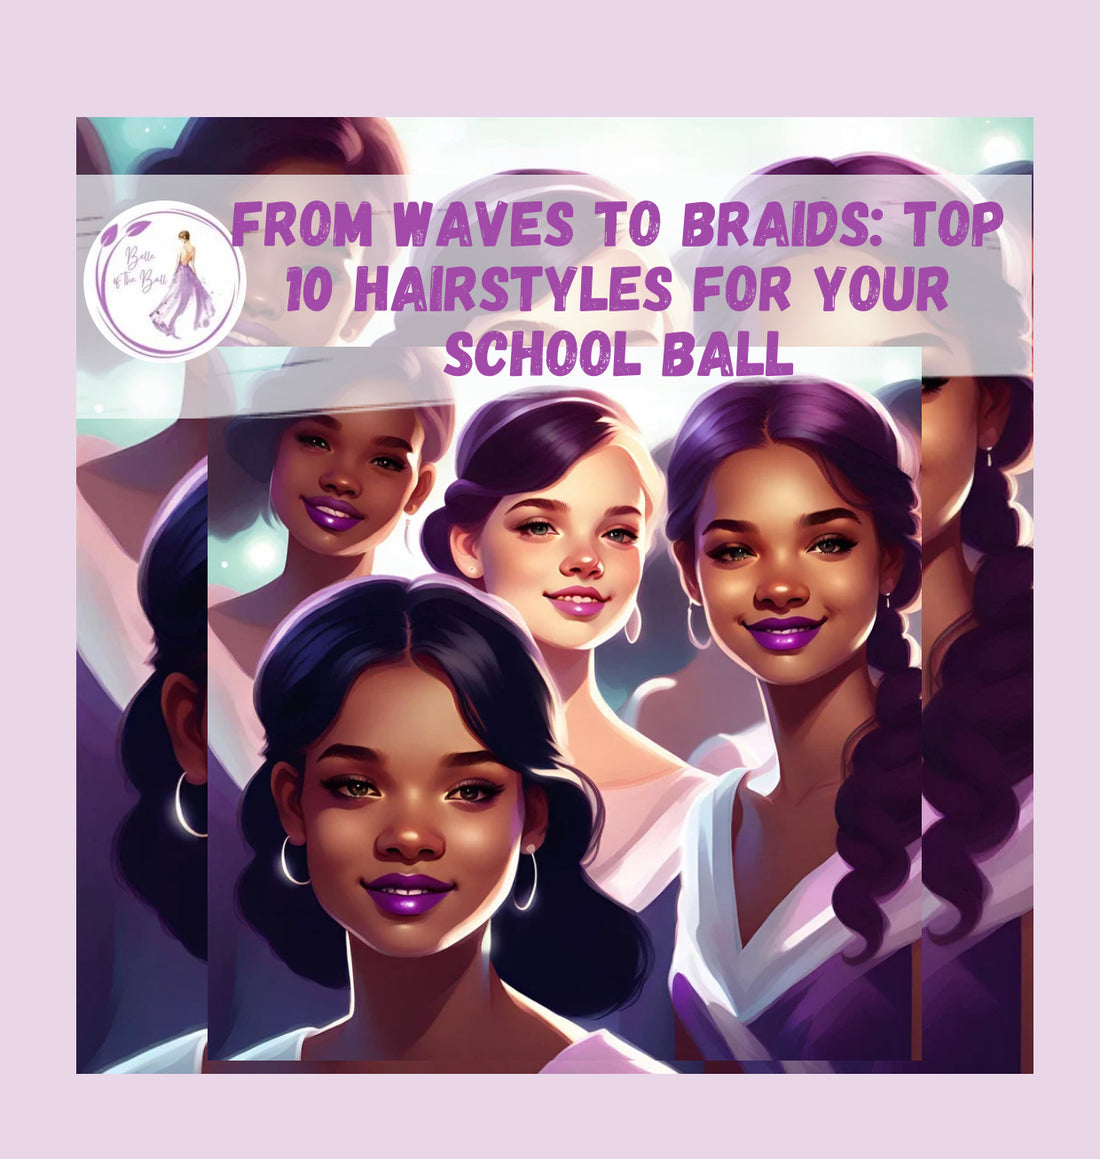 From Waves to Braids: Top 10 Hairstyles for your School Ball